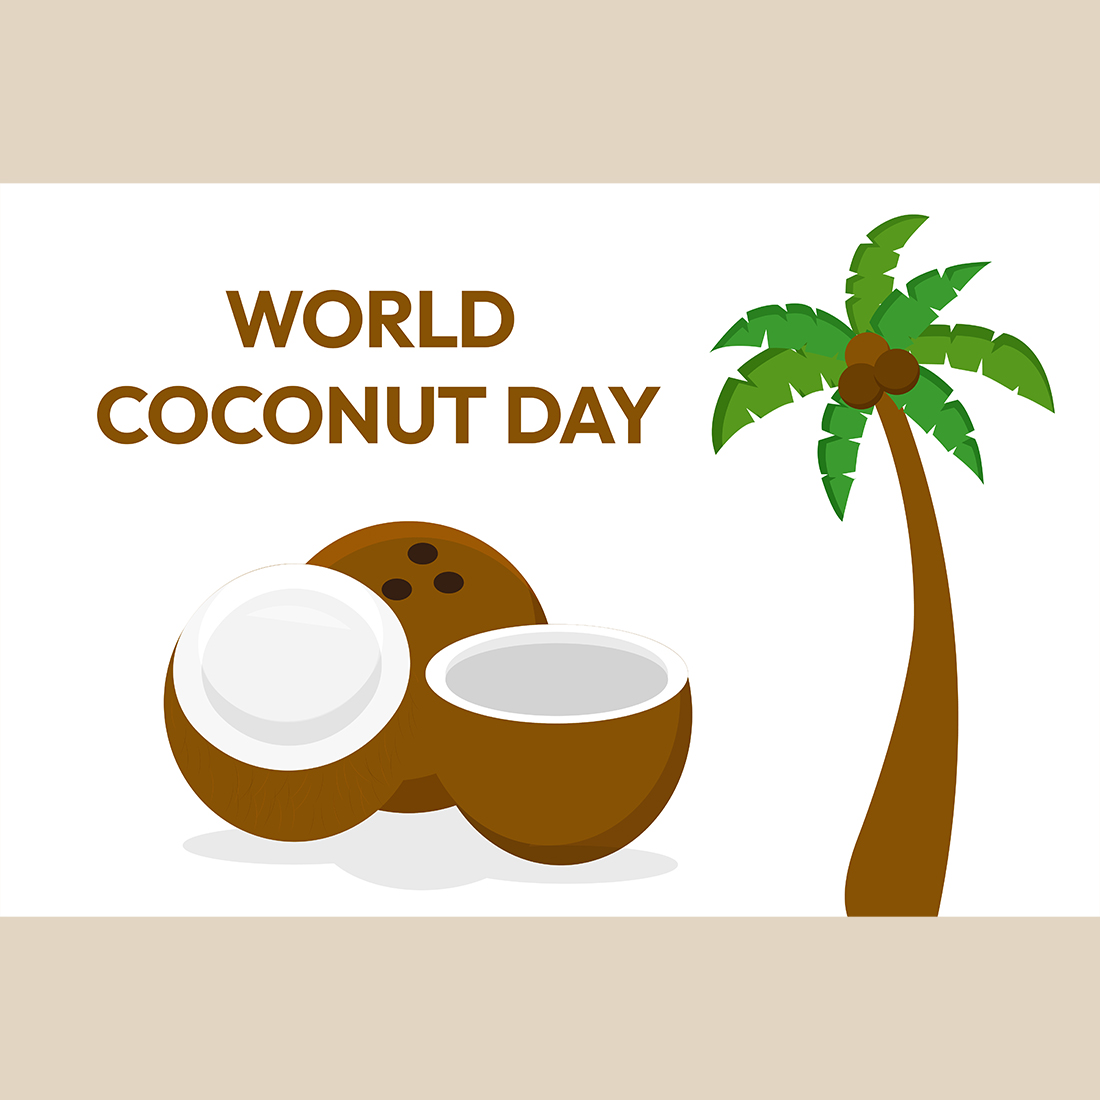 World coconut day design preview image.